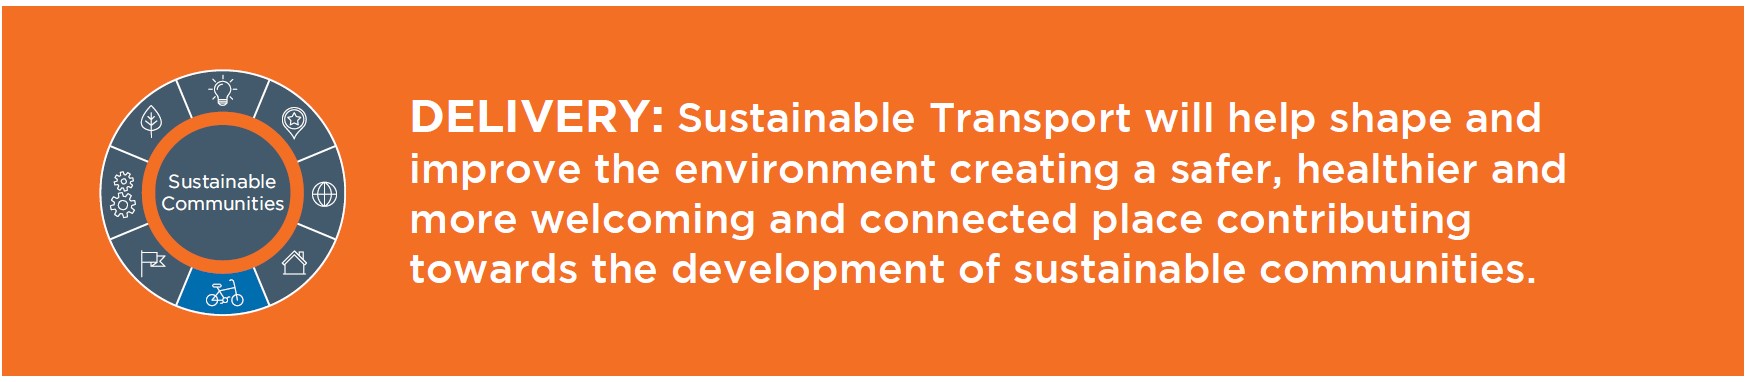 Sustainable Transport will help shape and improve the environment creating a healthier and more welcoming and connected place contributing towards the development of sustainable communities. 